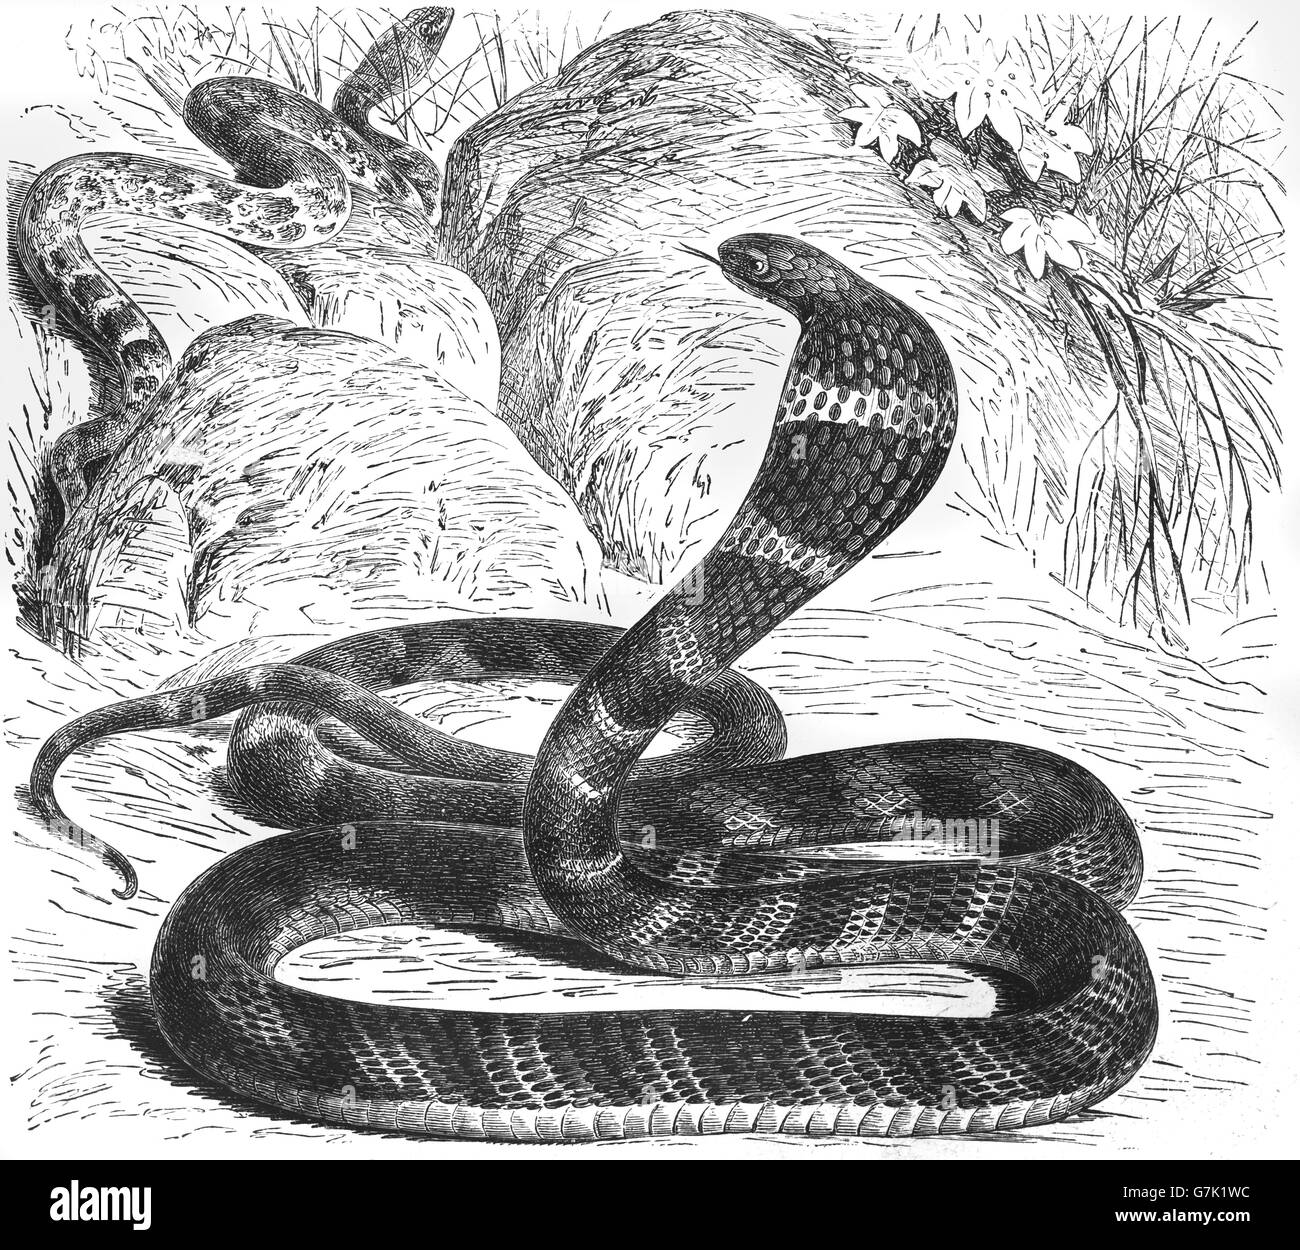 King cobra, Ophiophagus hannah, illustration from book dated 1904 Stock Photo